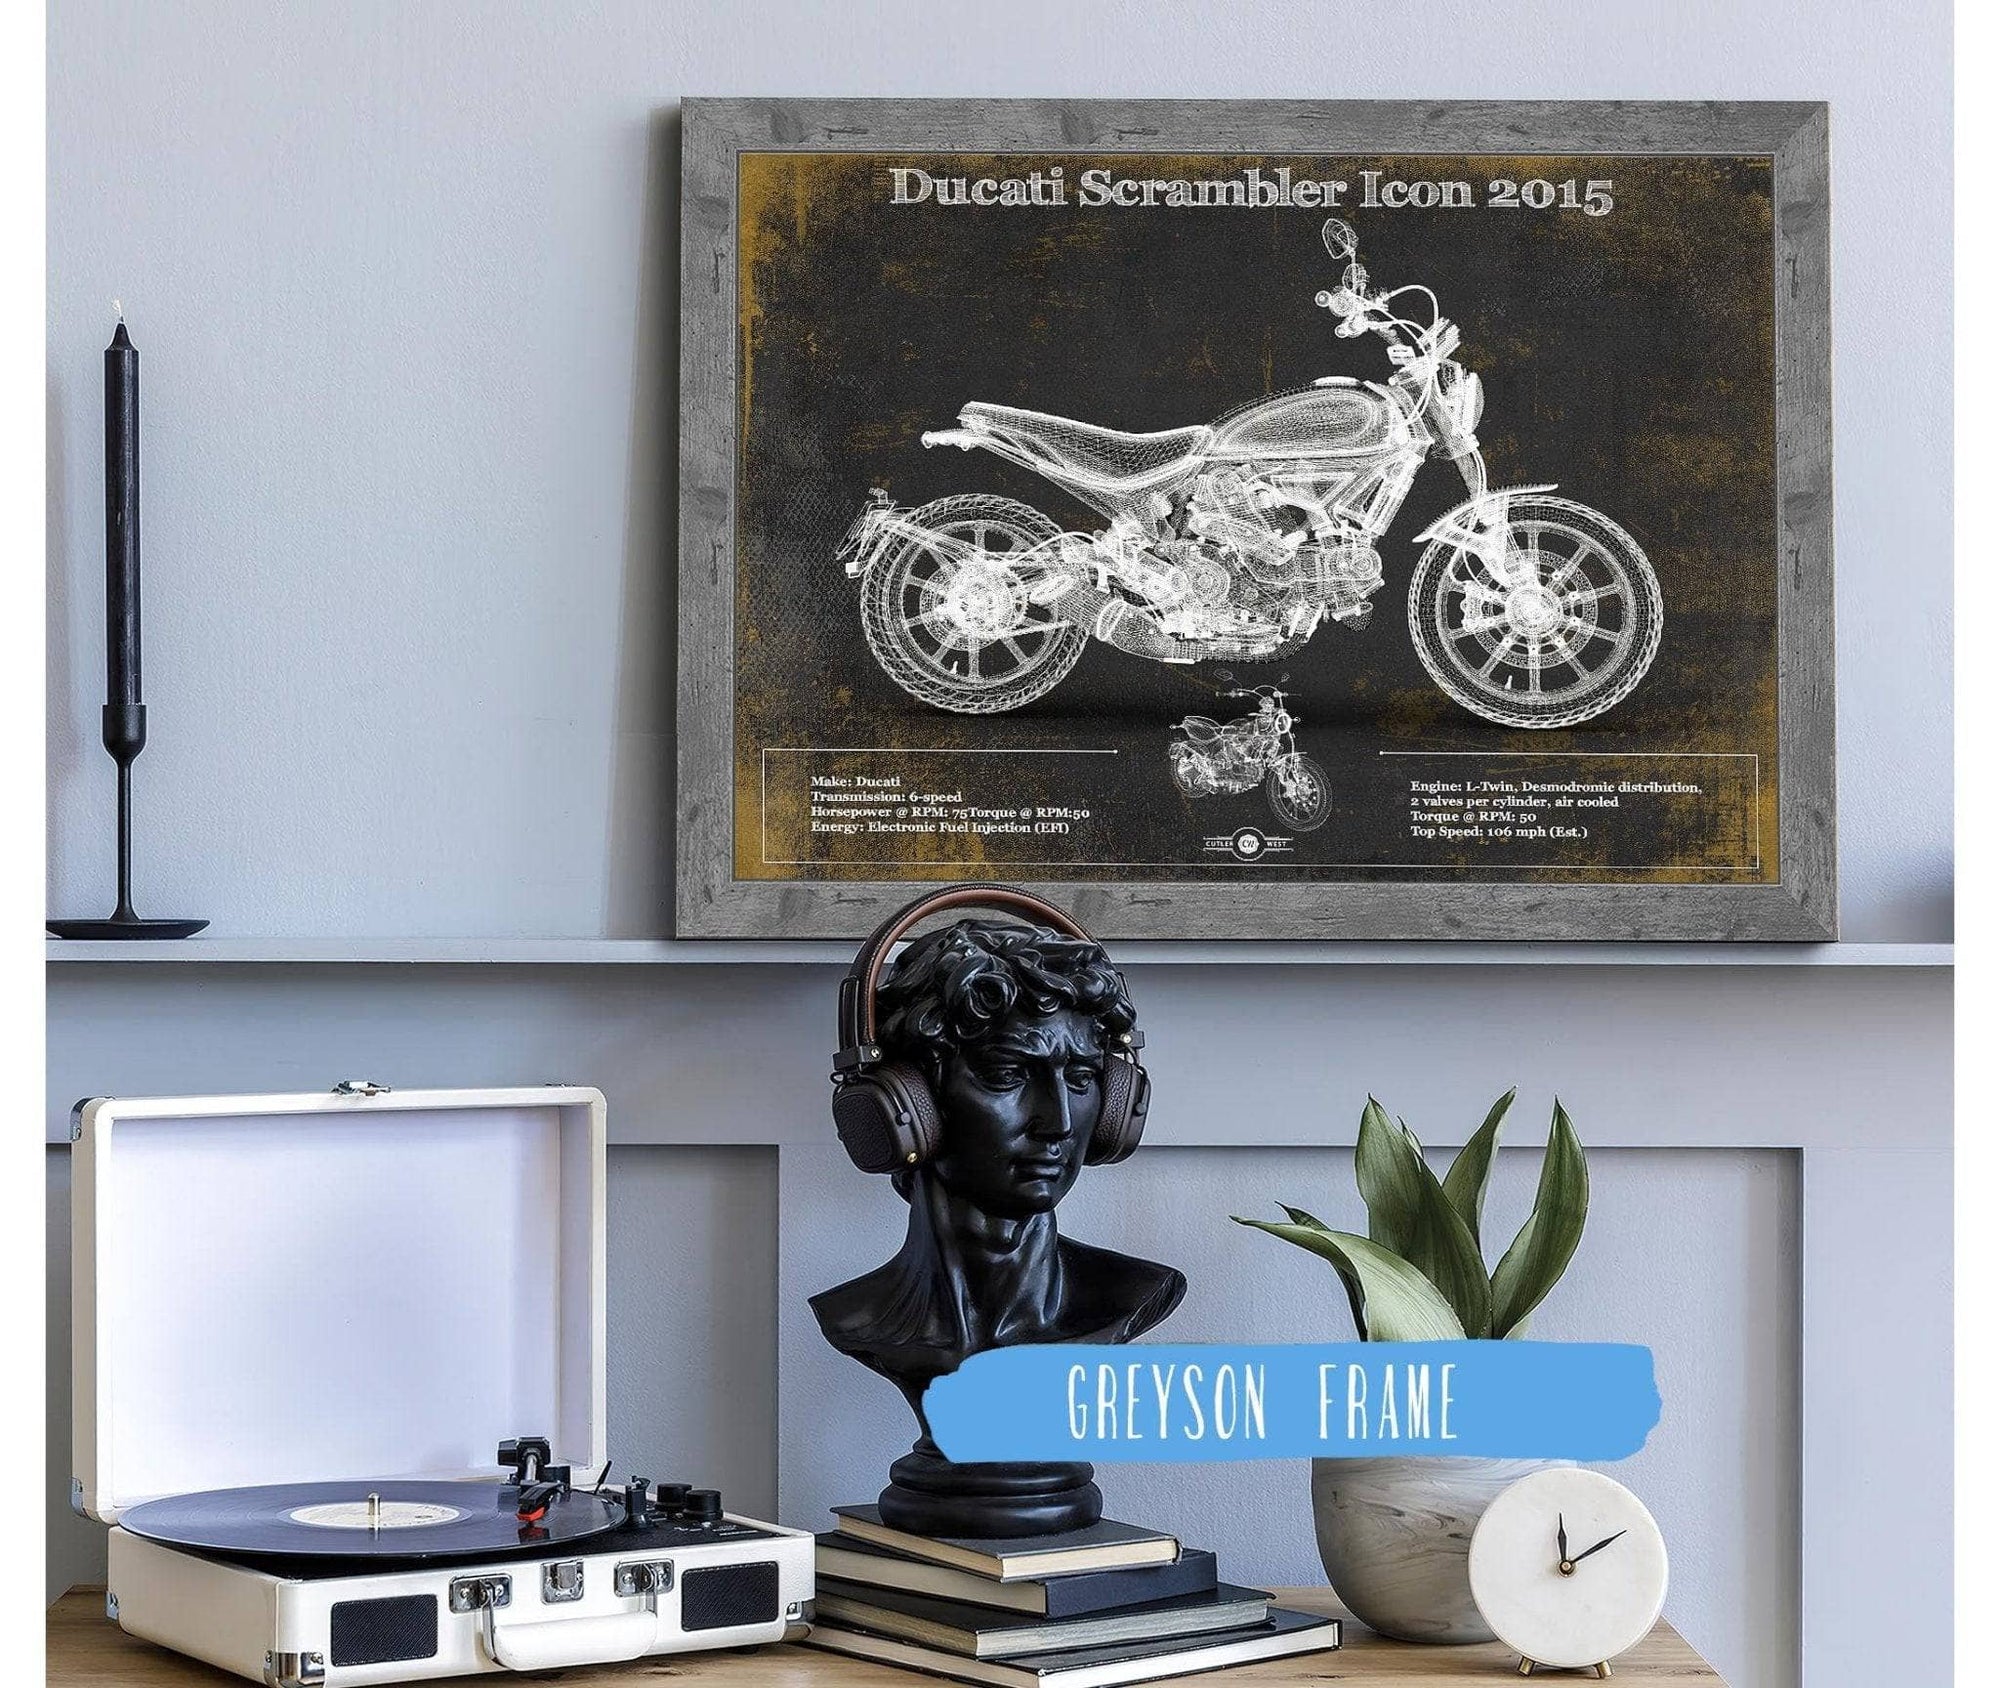 Cutler West Best Selling Collection 14" x 11" / Greyson Frame Ducati Scrambler Icon 2015 Vintage Blueprint Motorcycle Patent Print 845000226_61218